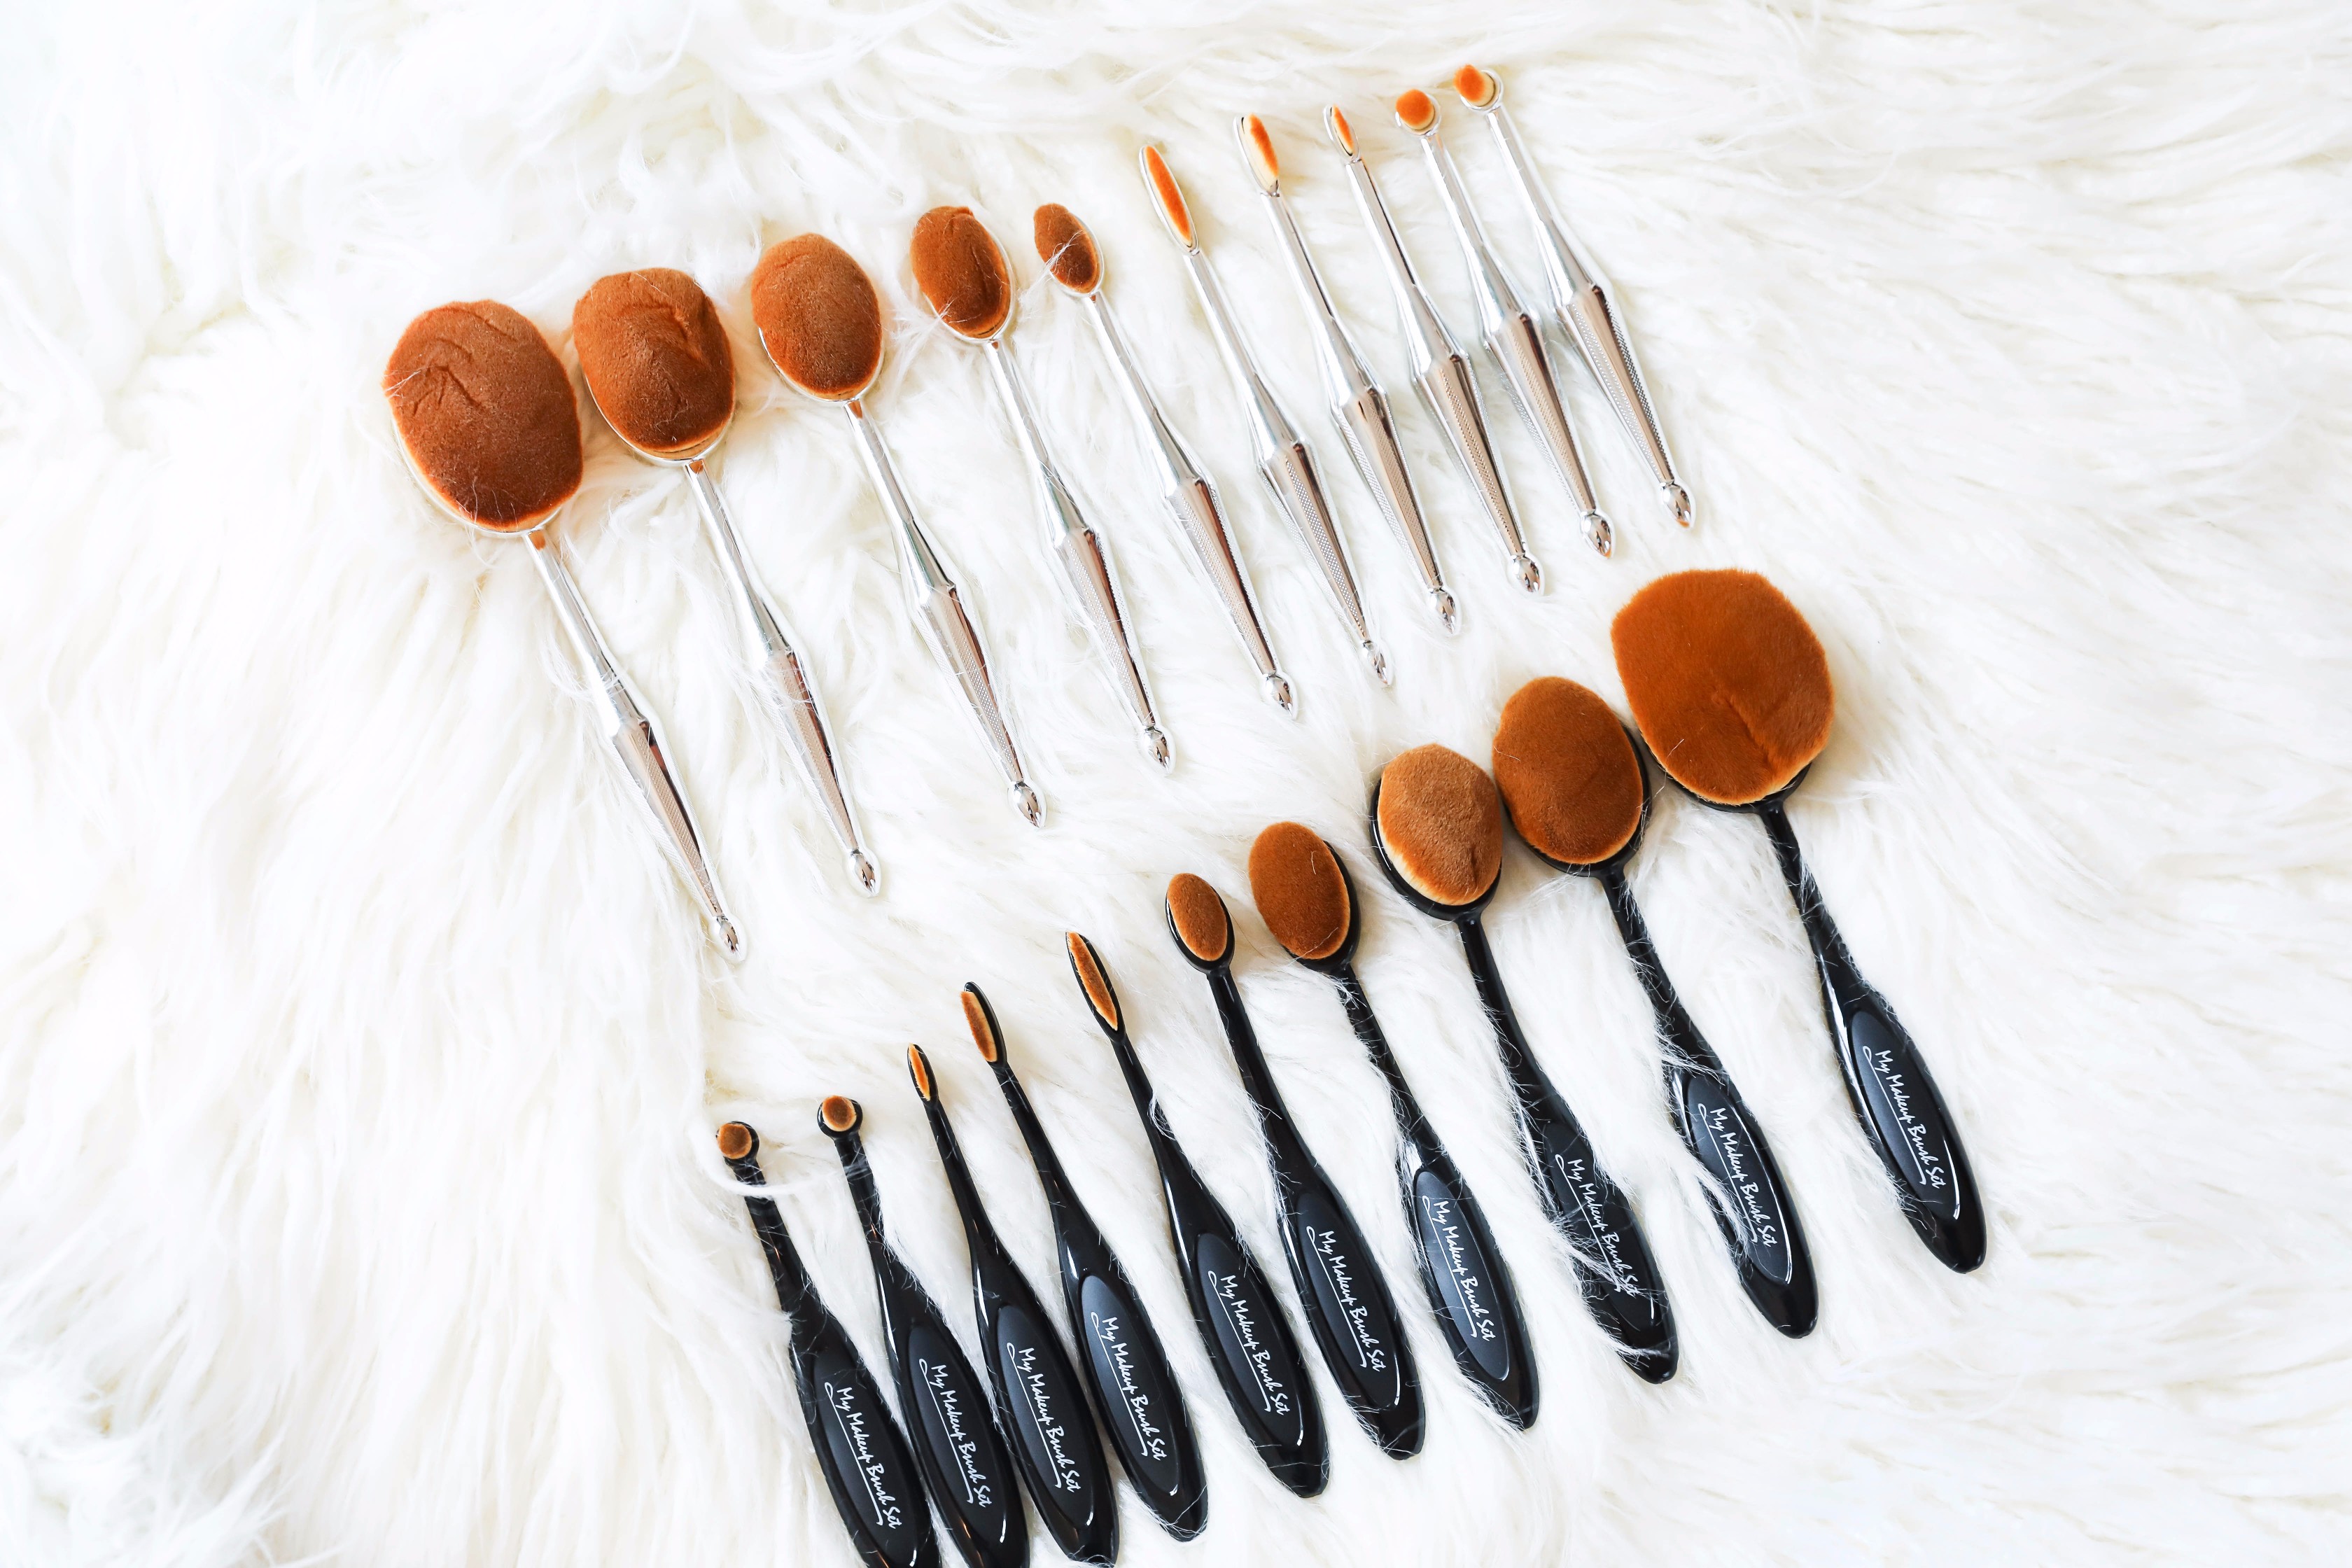 October beauty favorites! Mikas Beauty round makeup brushes! Beauty flatlay! Details on daily dose of charm by lauren lindmark